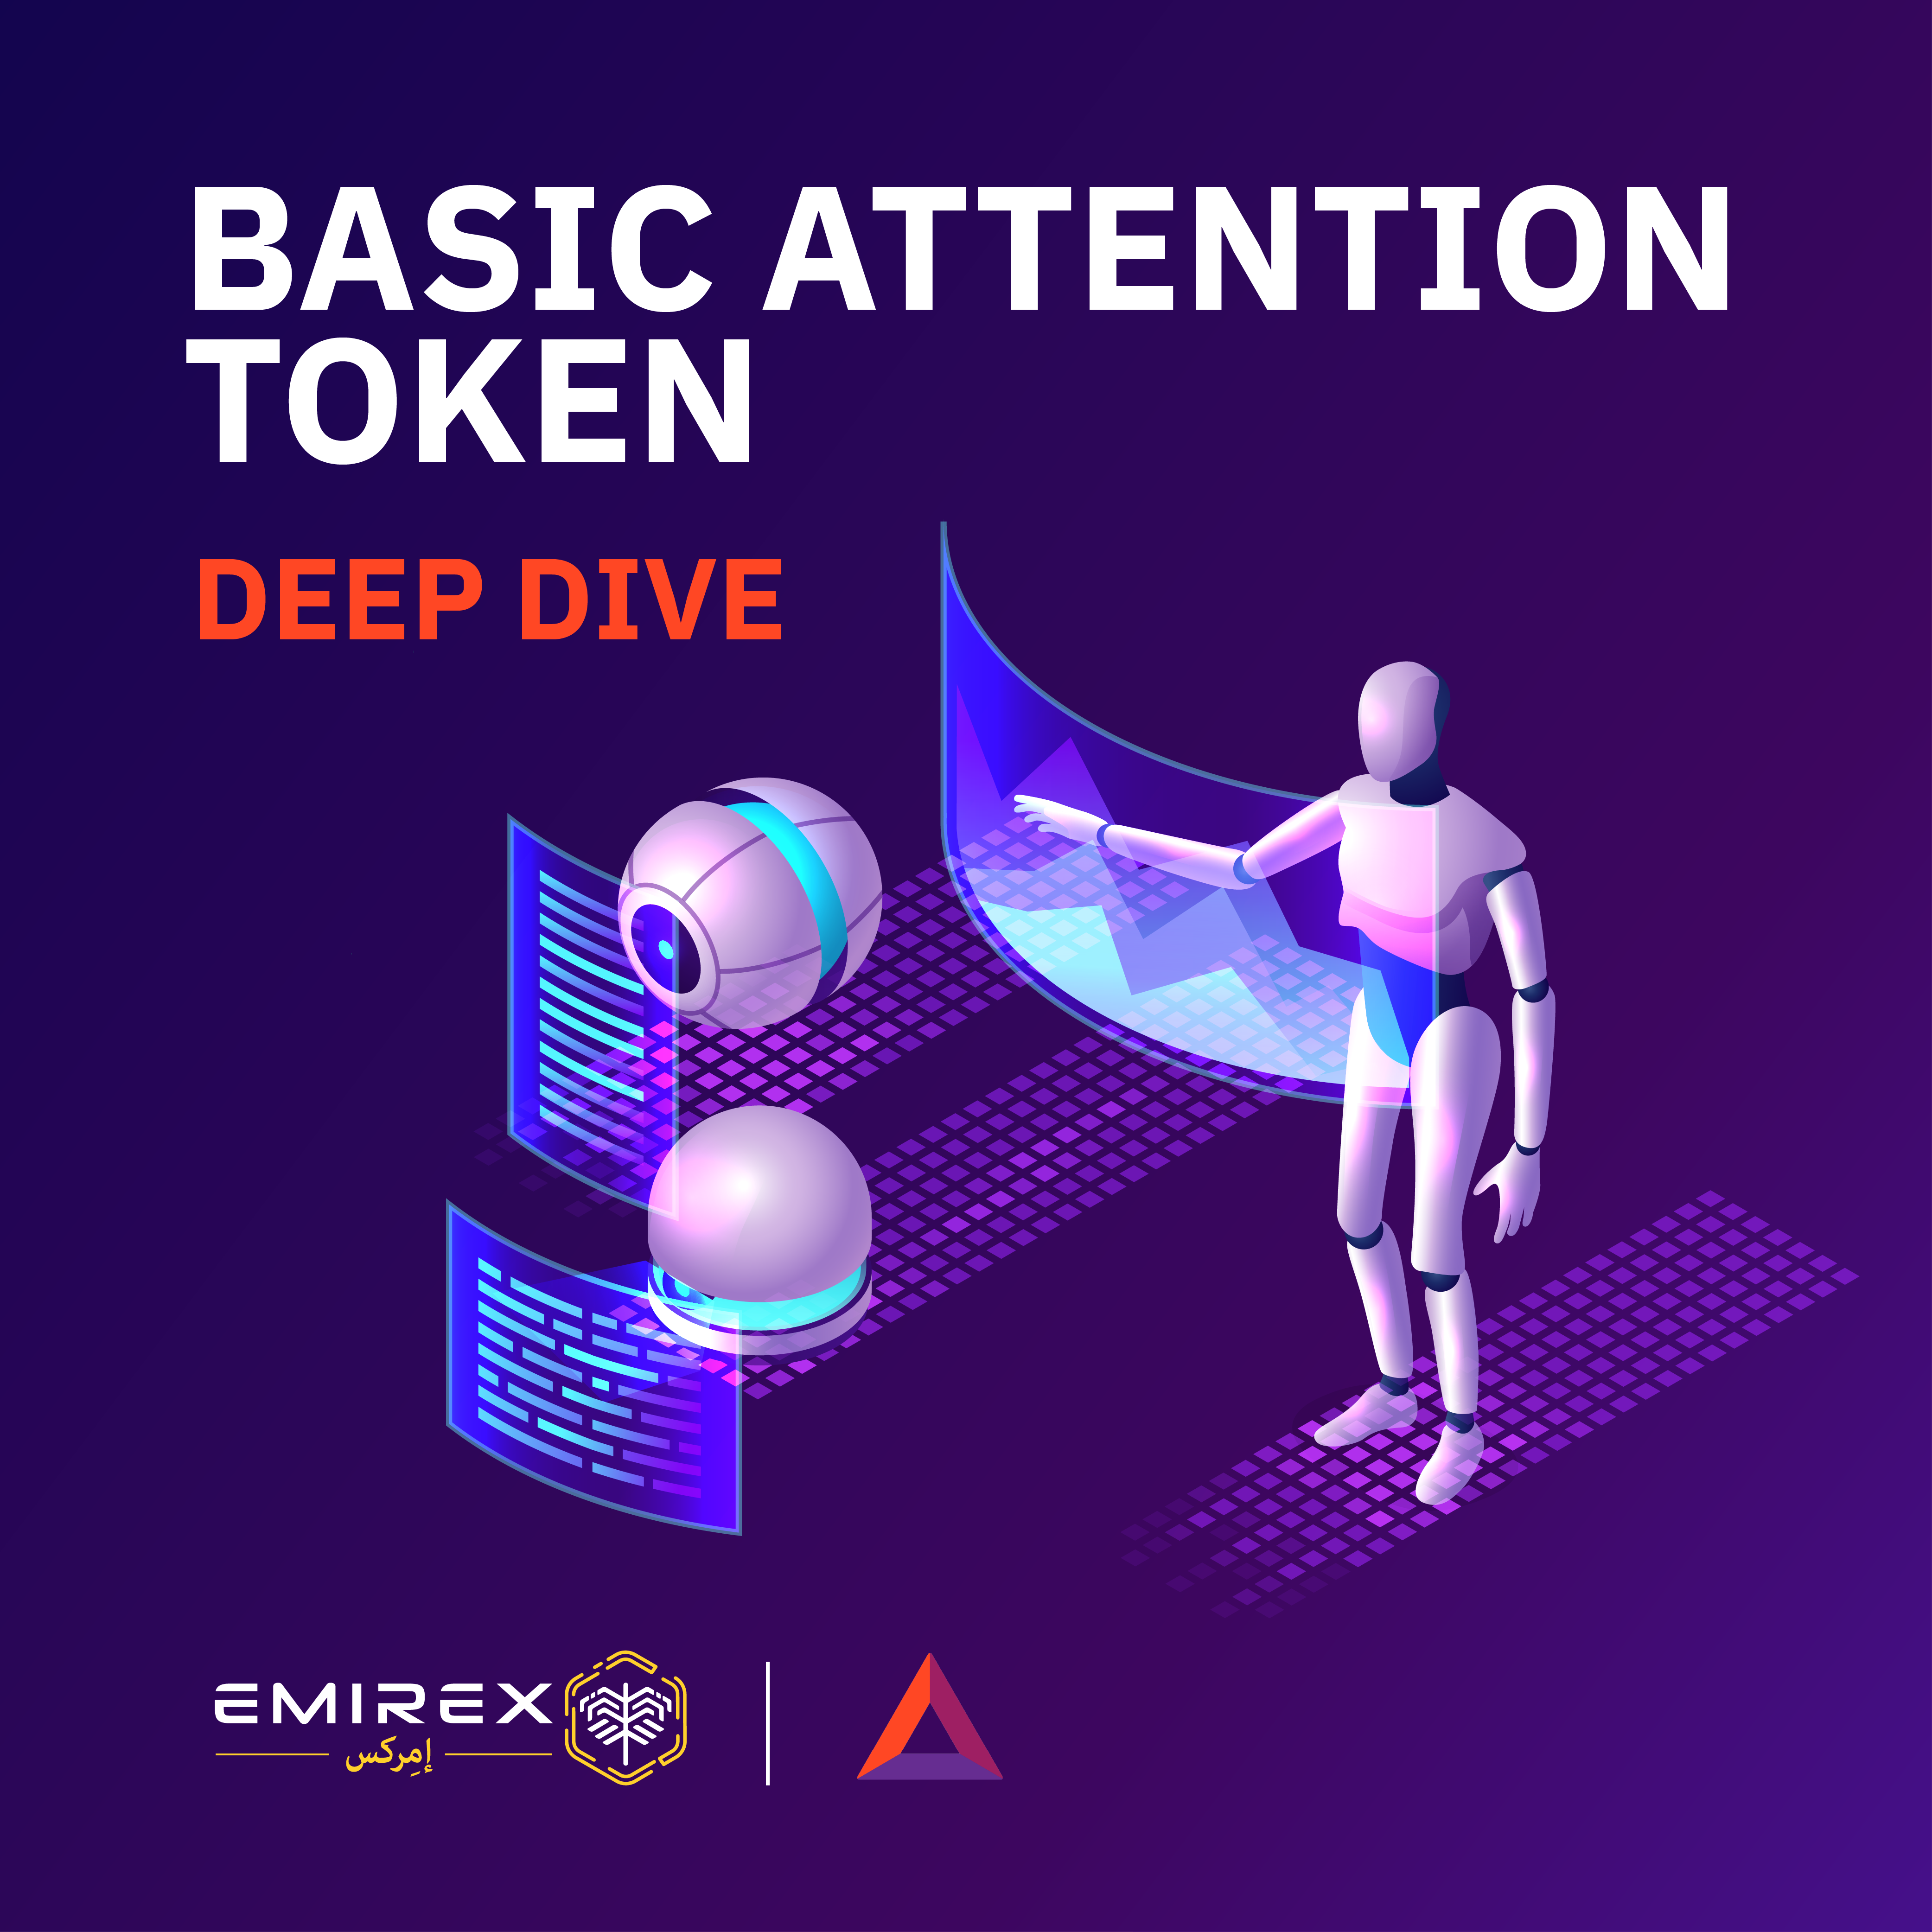 Detailed Analysis of Basic Attention Token